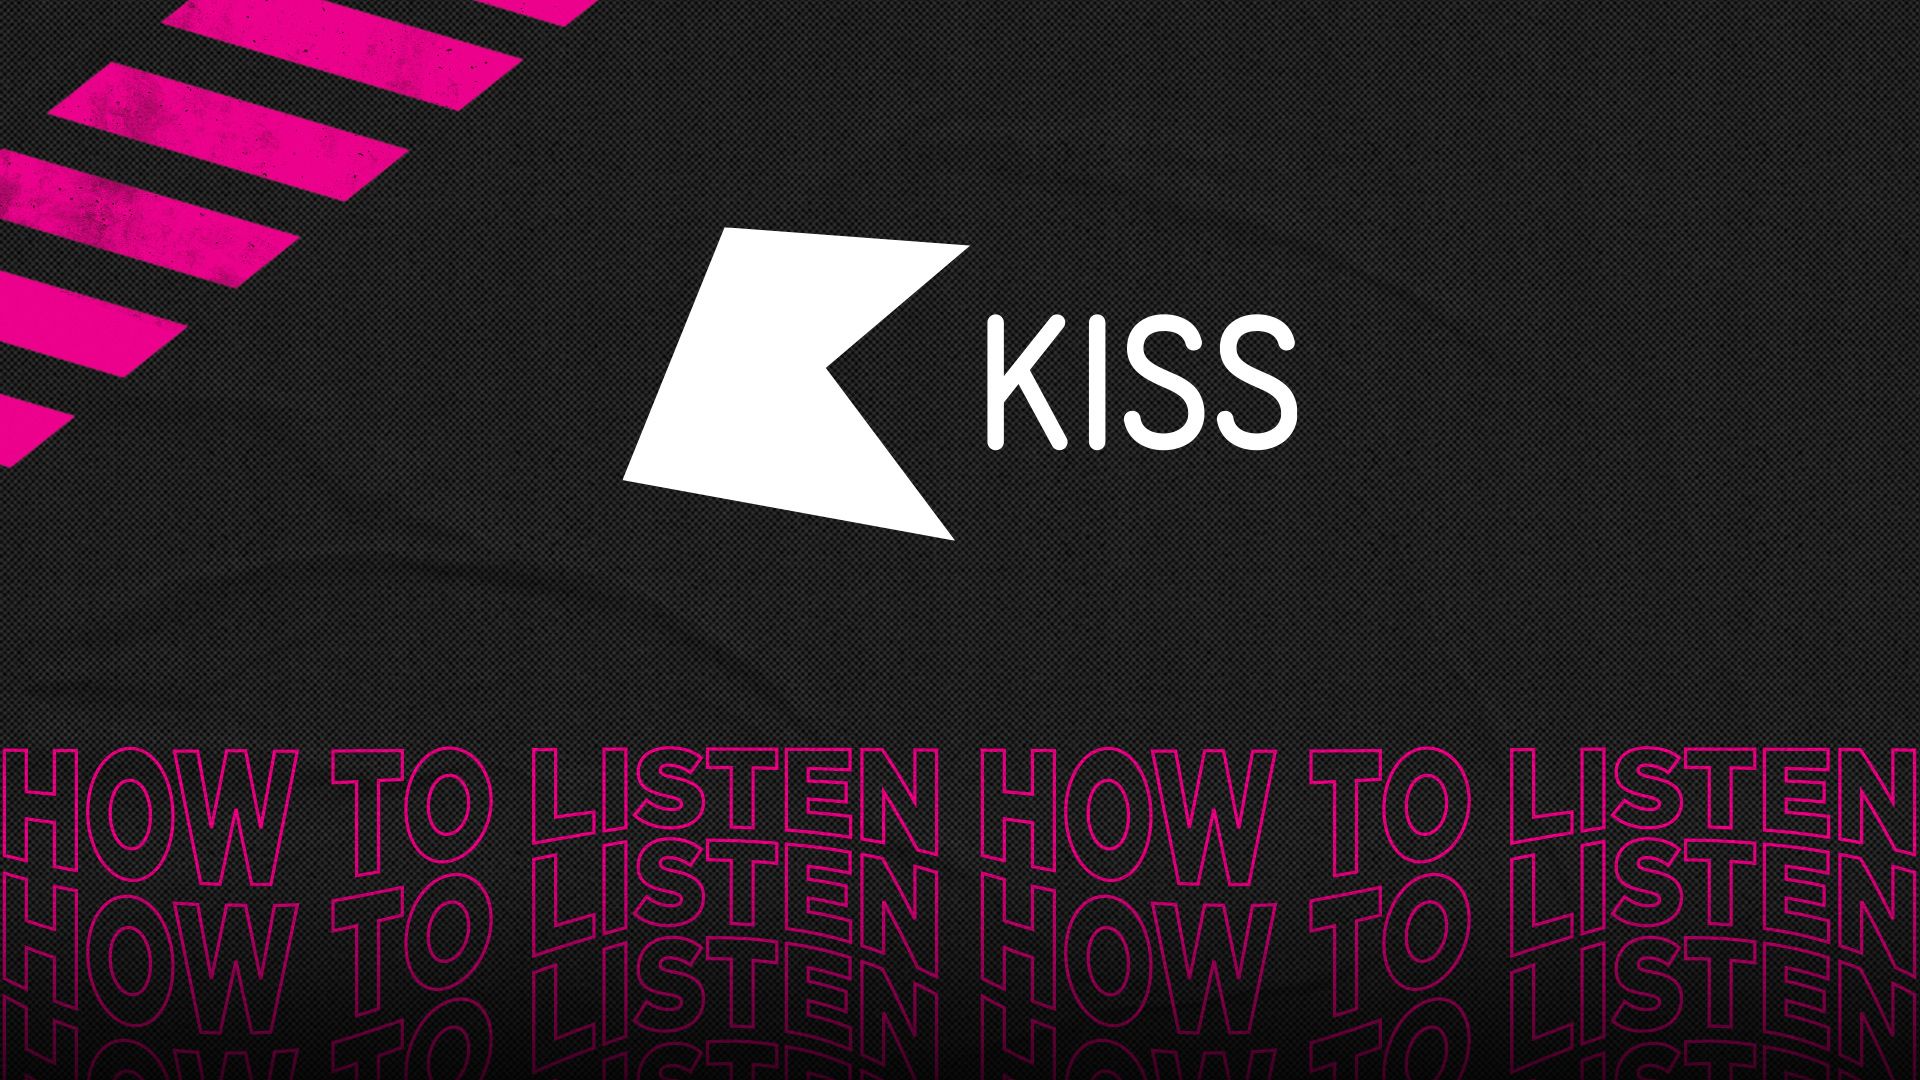 How to listen to KISS FM across all your devices